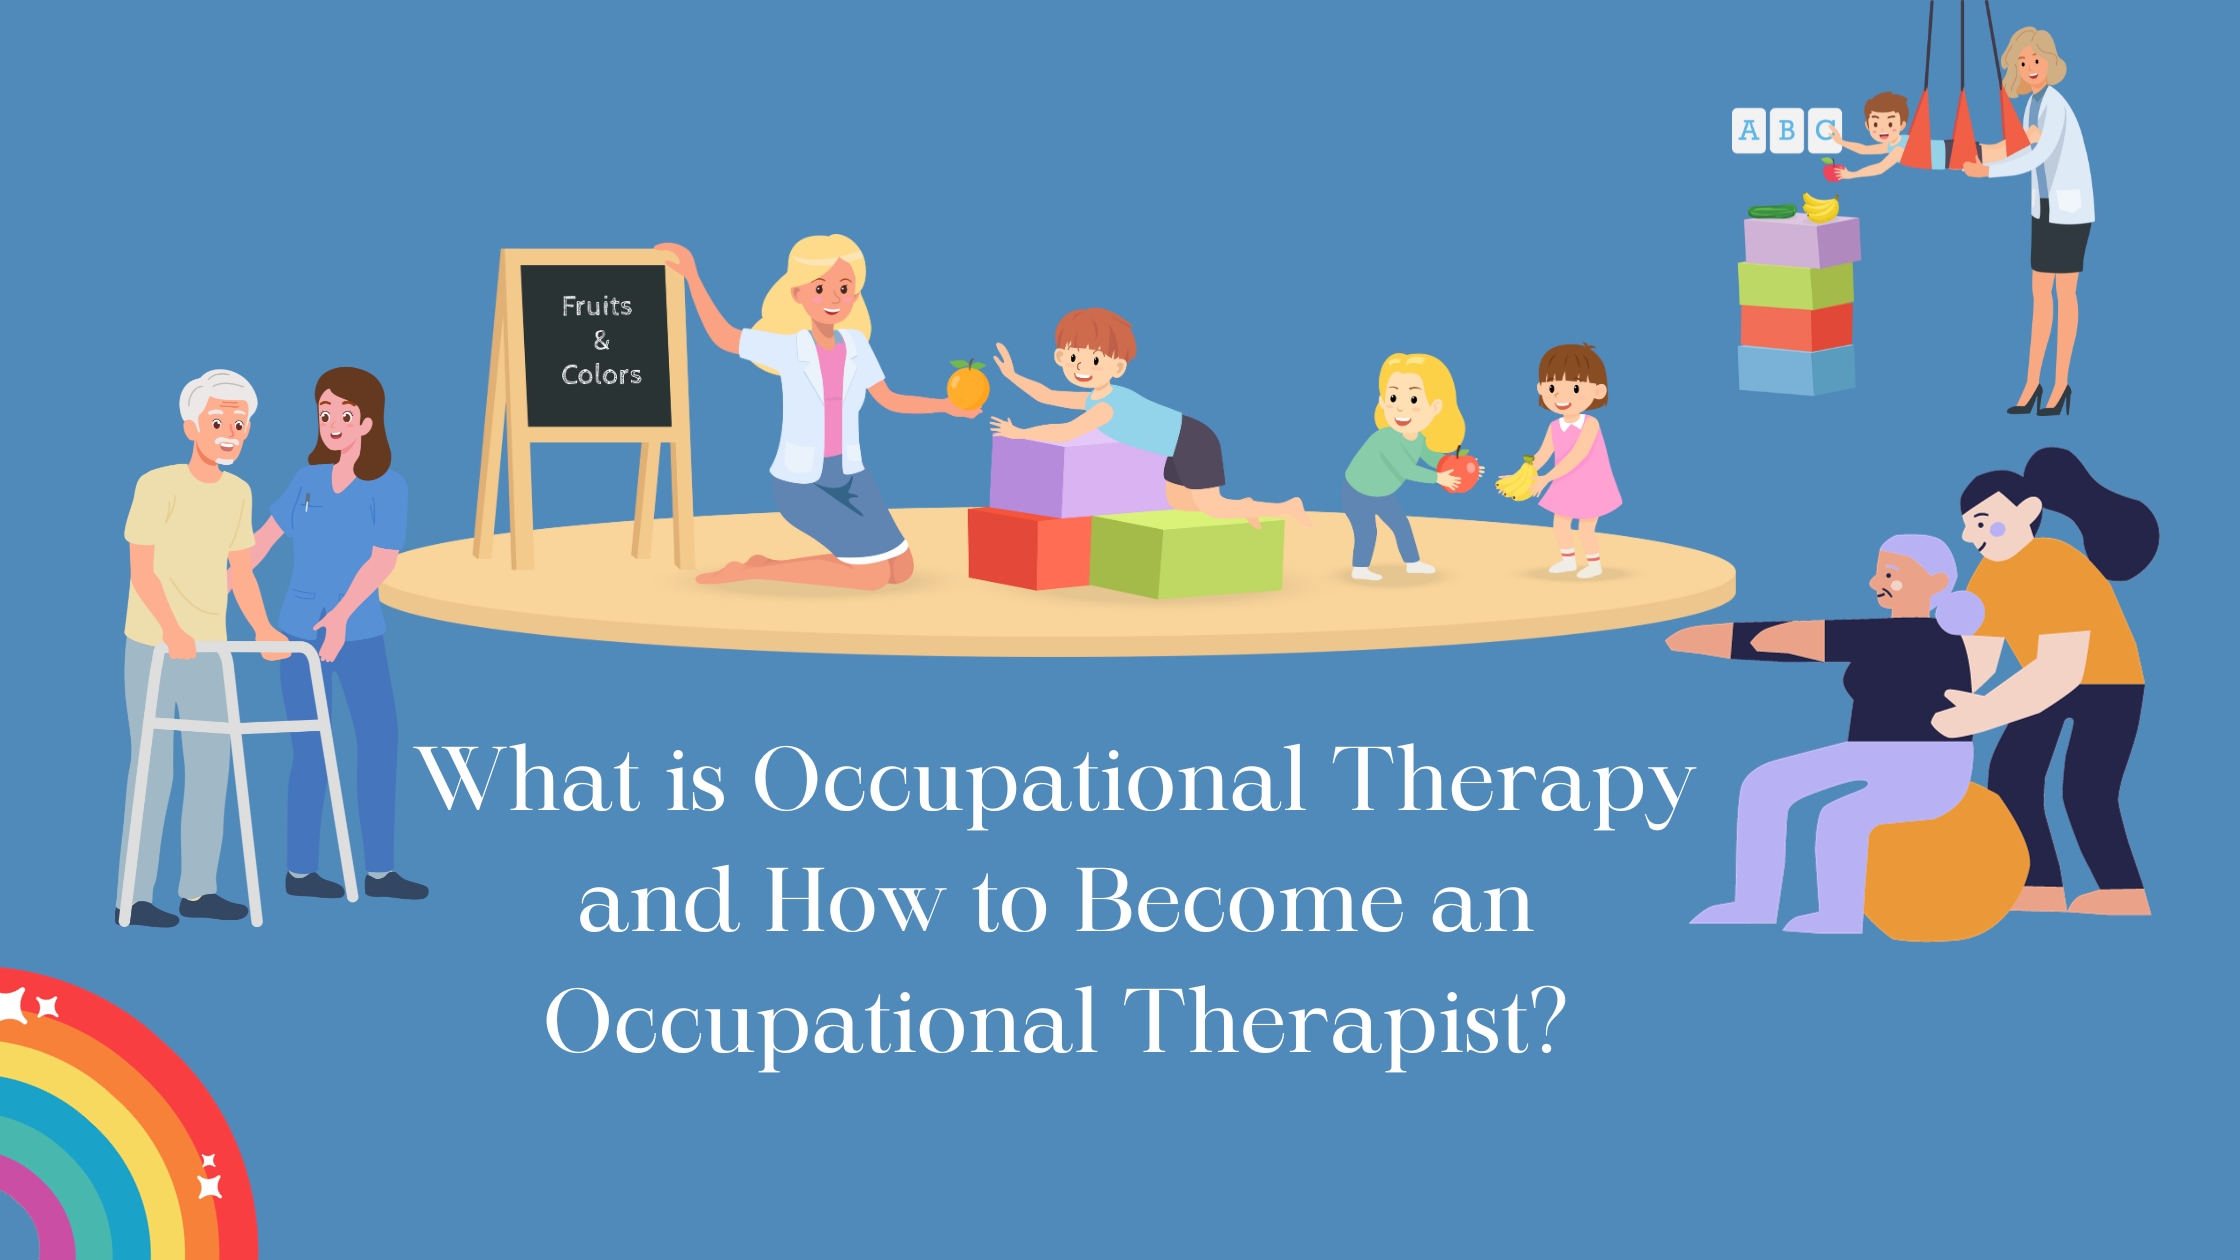 What is occupational therapy and how to become an occupational therapist